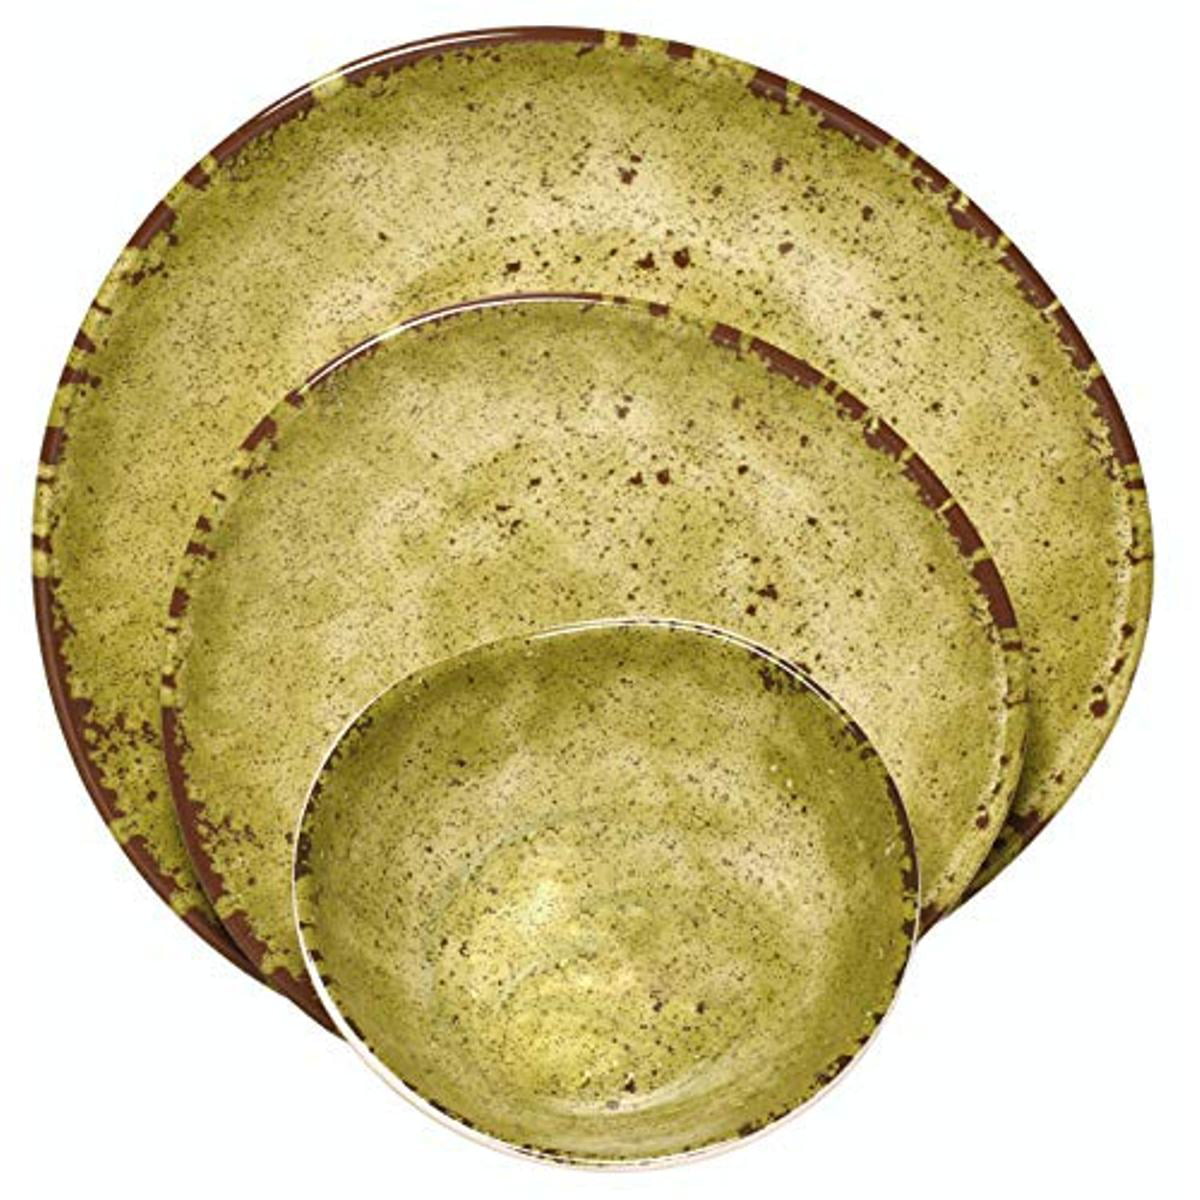 Color: Pastel Colors Clay Collection 4 Each Salad Plate & Soup Bowl Melange 12-Piece Melamine Dinnerware Set Dinner Plate | Shatter-Proof and Chip-Resistant Melamine Plates and Bowls 